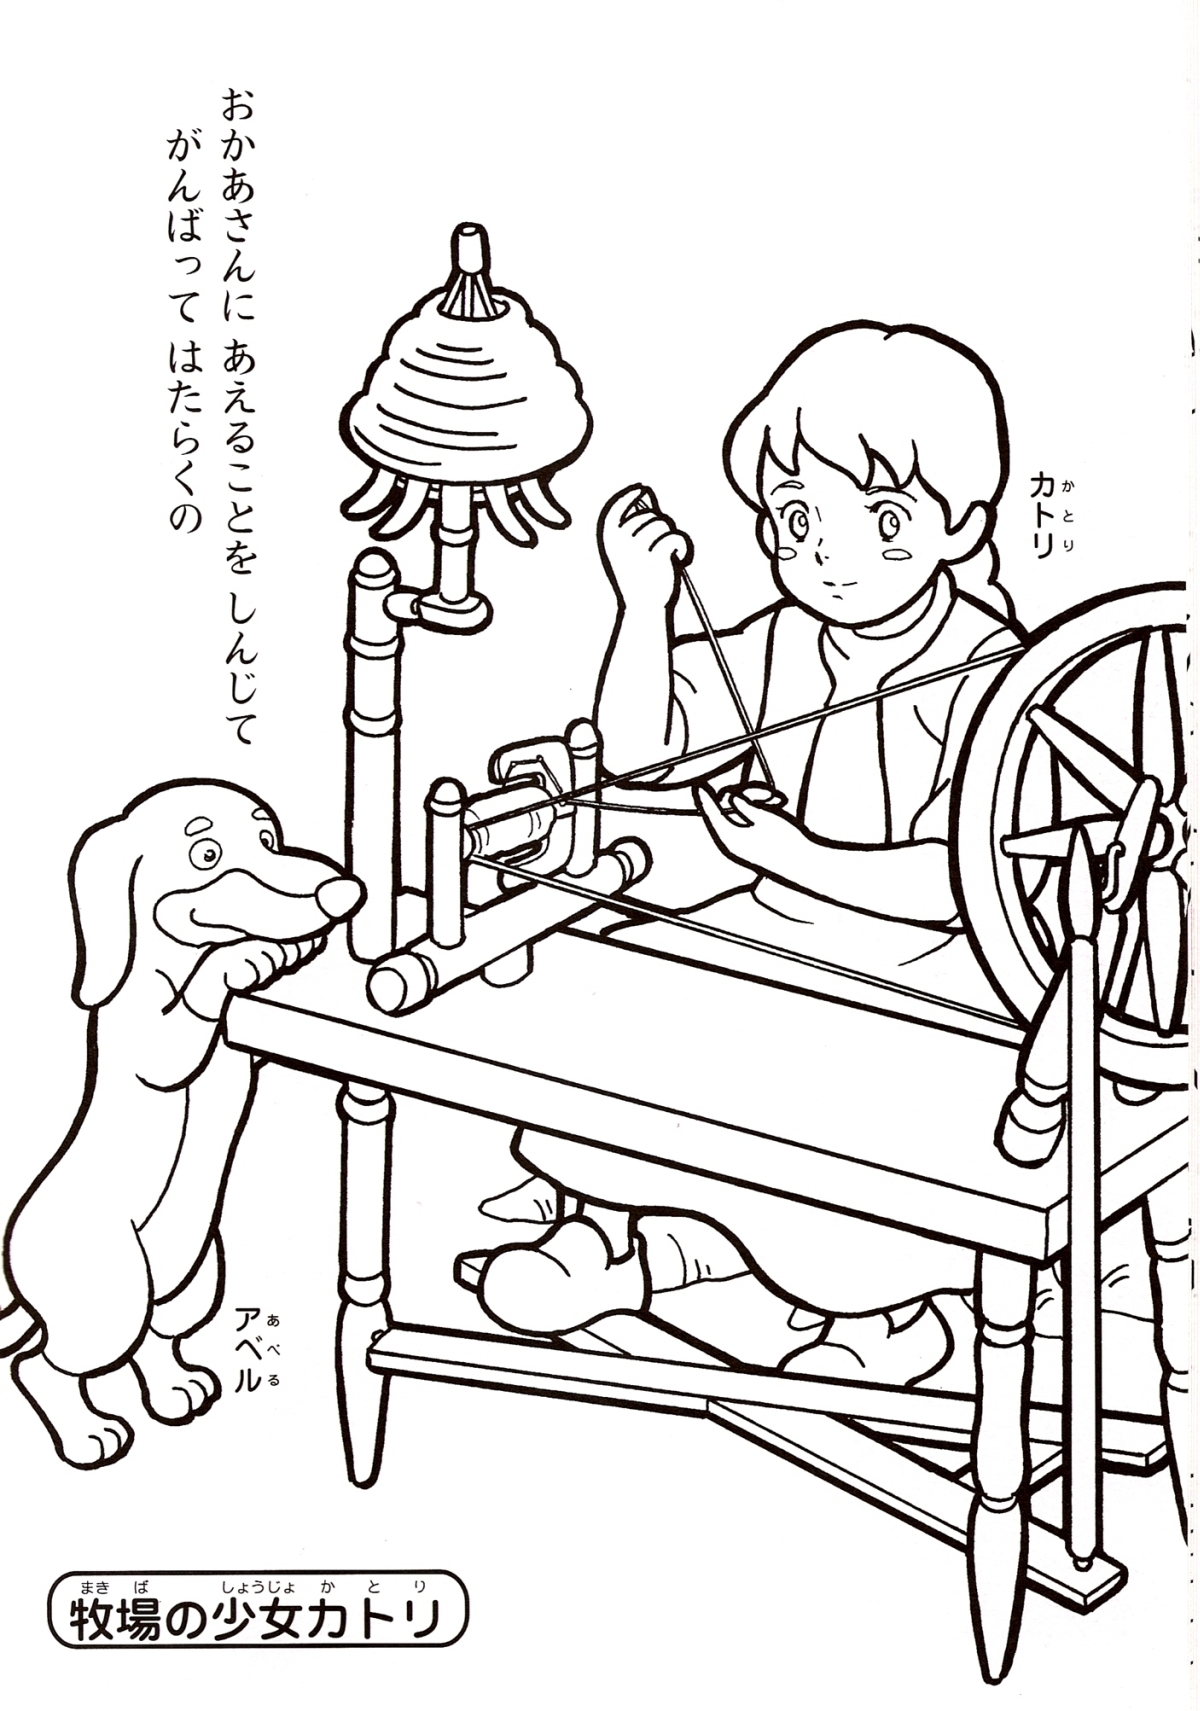 mama mia coloring pages - photo #23